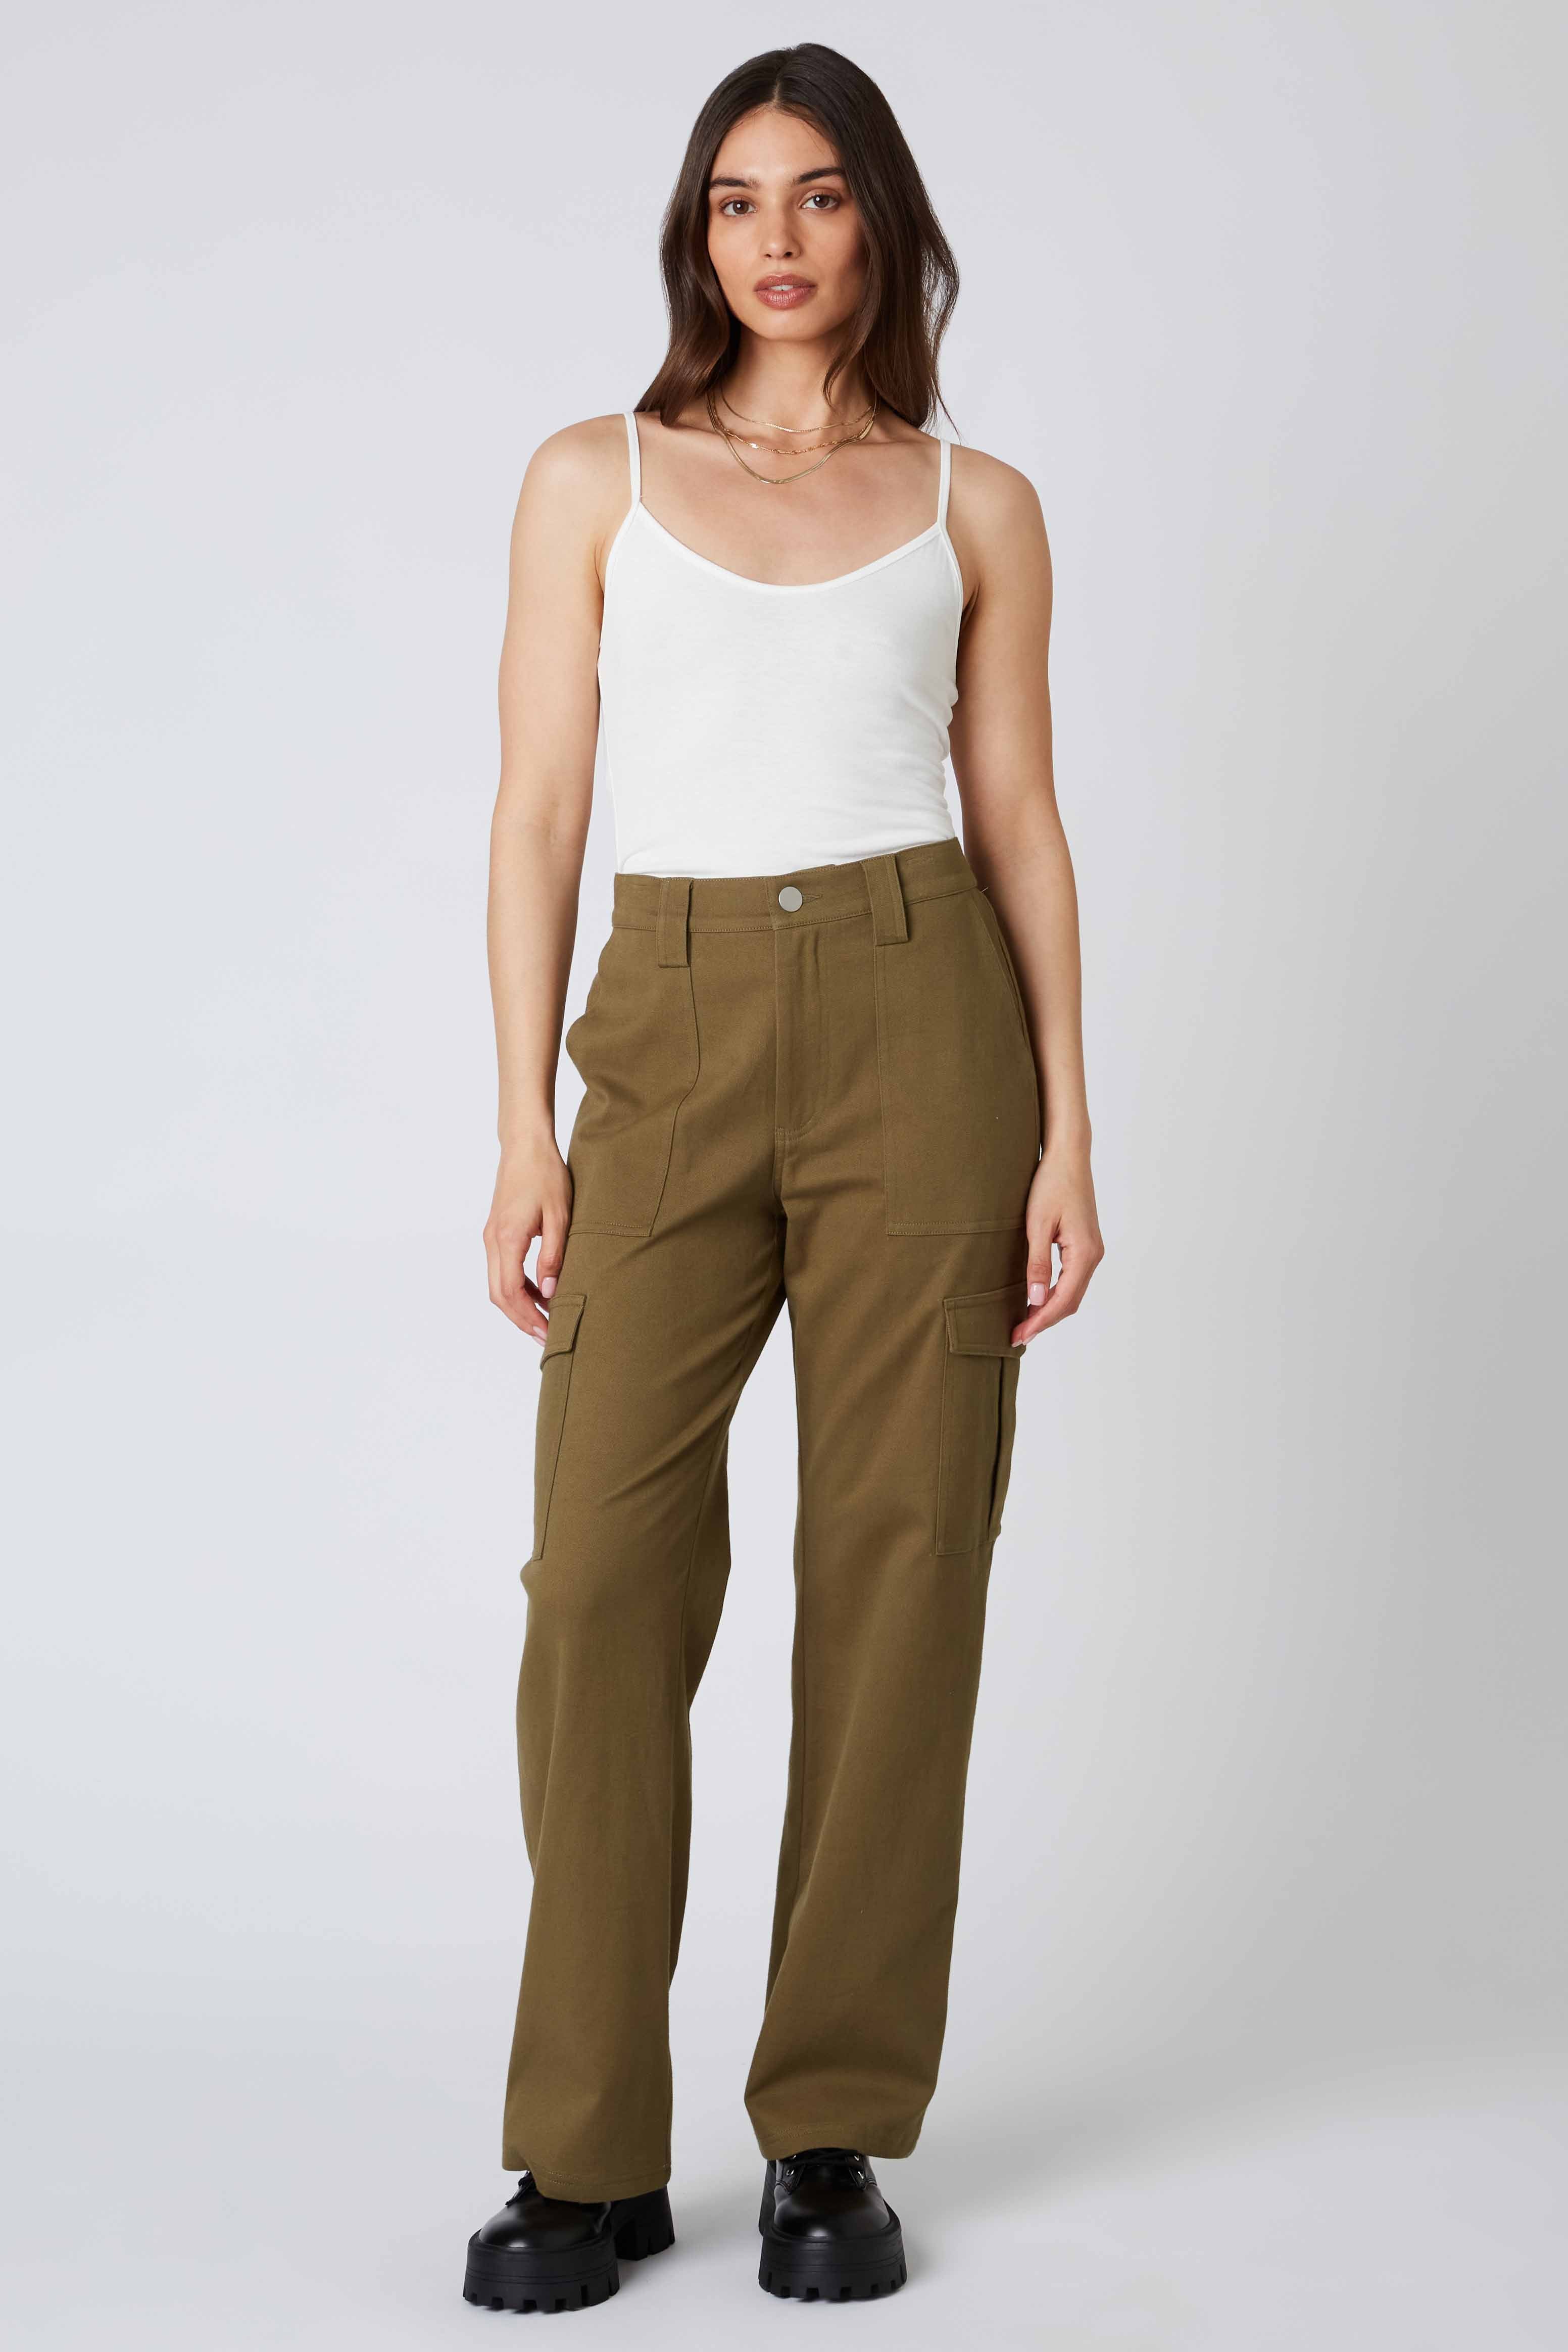 Twill Cargo Pants in Fern Front View